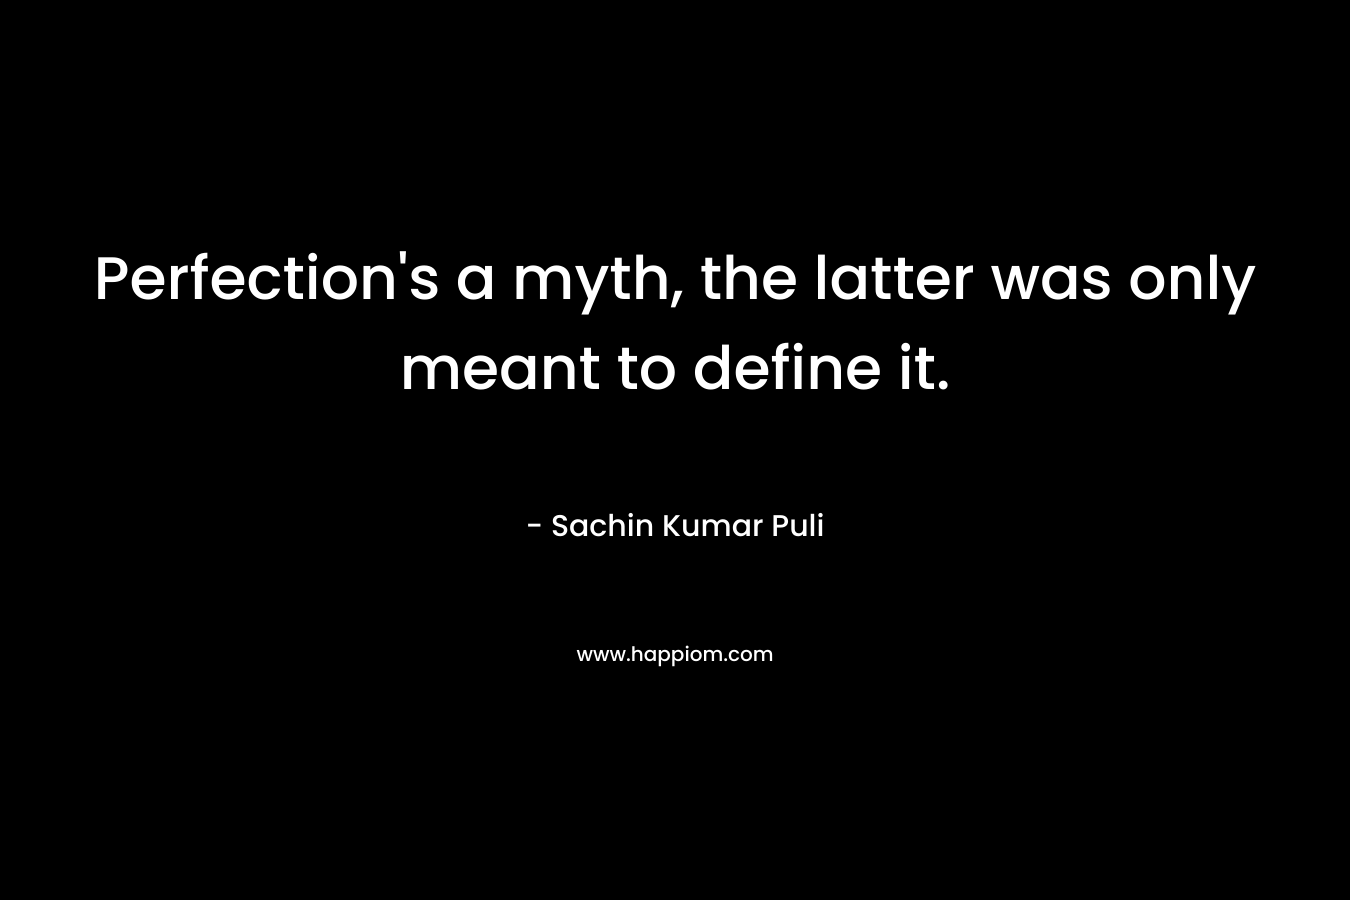 Perfection’s a myth, the latter was only meant to define it. – Sachin Kumar Puli